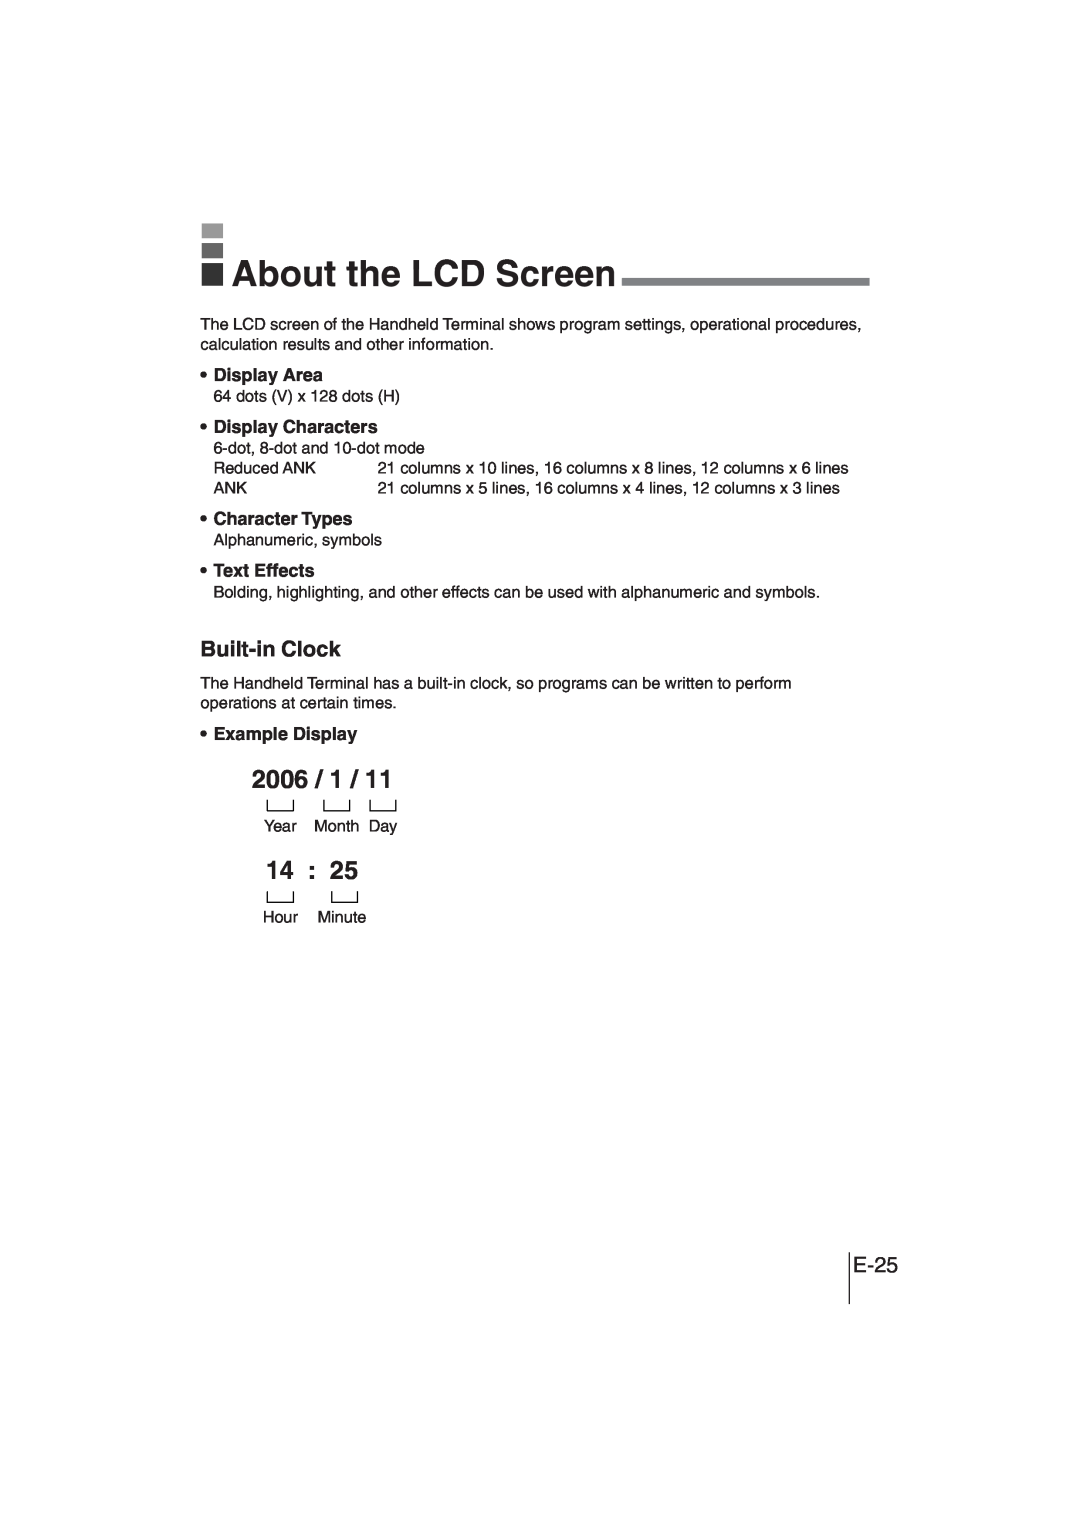 Casio DT-930 manual About the LCD Screen, 2006, Built-inClock, E-25, Display Area, Display Characters, Character Types 